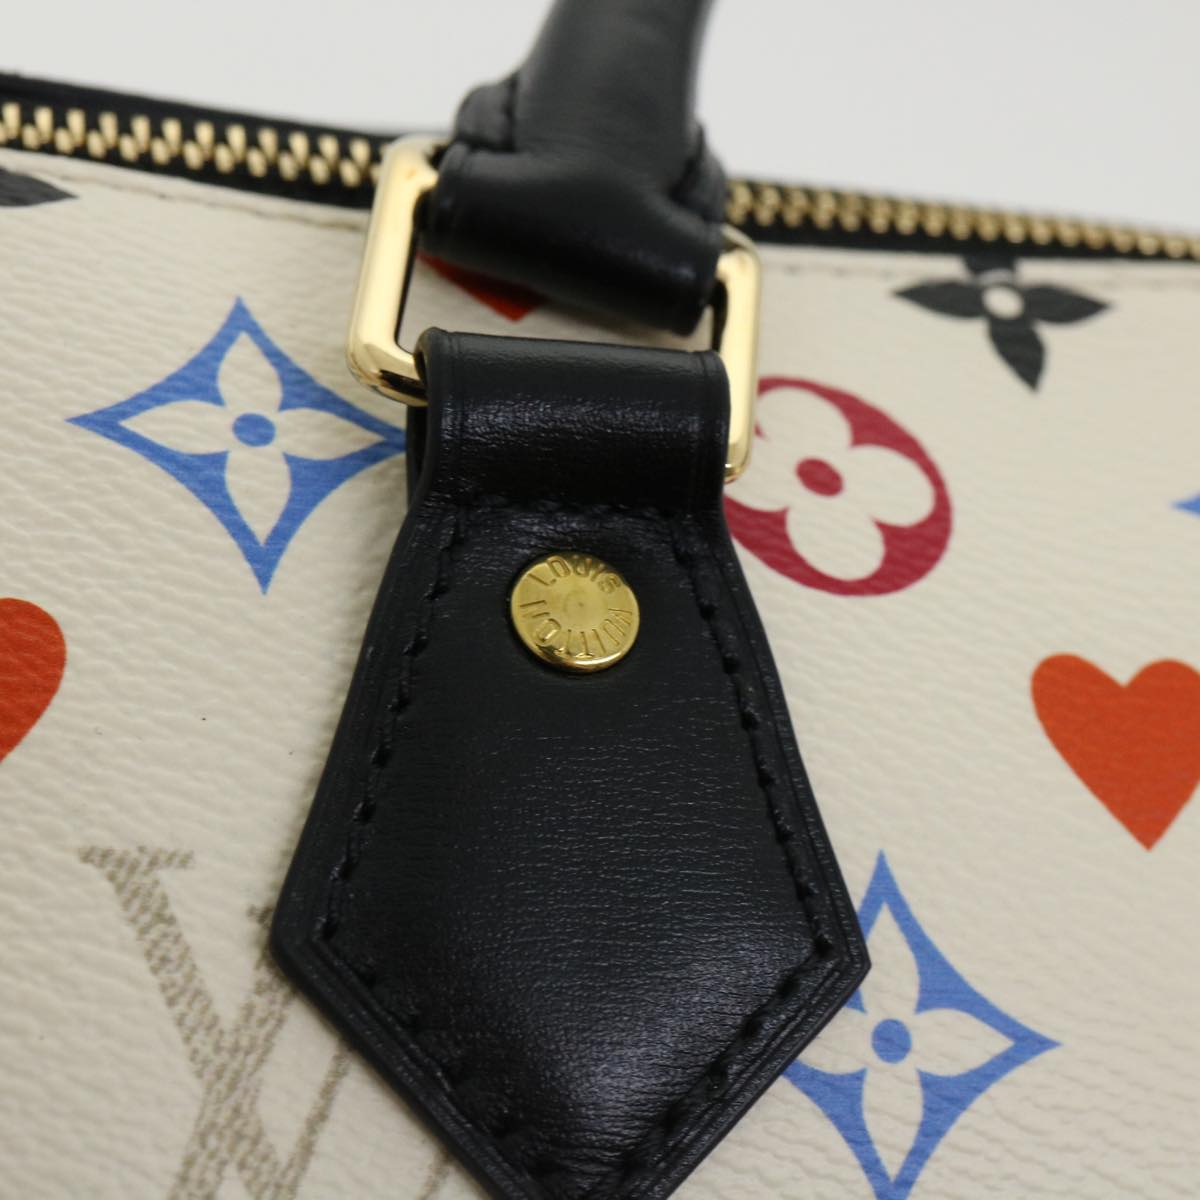 LOUIS VUITTON Monogram game on Speedy Bandouliere 25 Hand Bag 2way Auth bs2097A